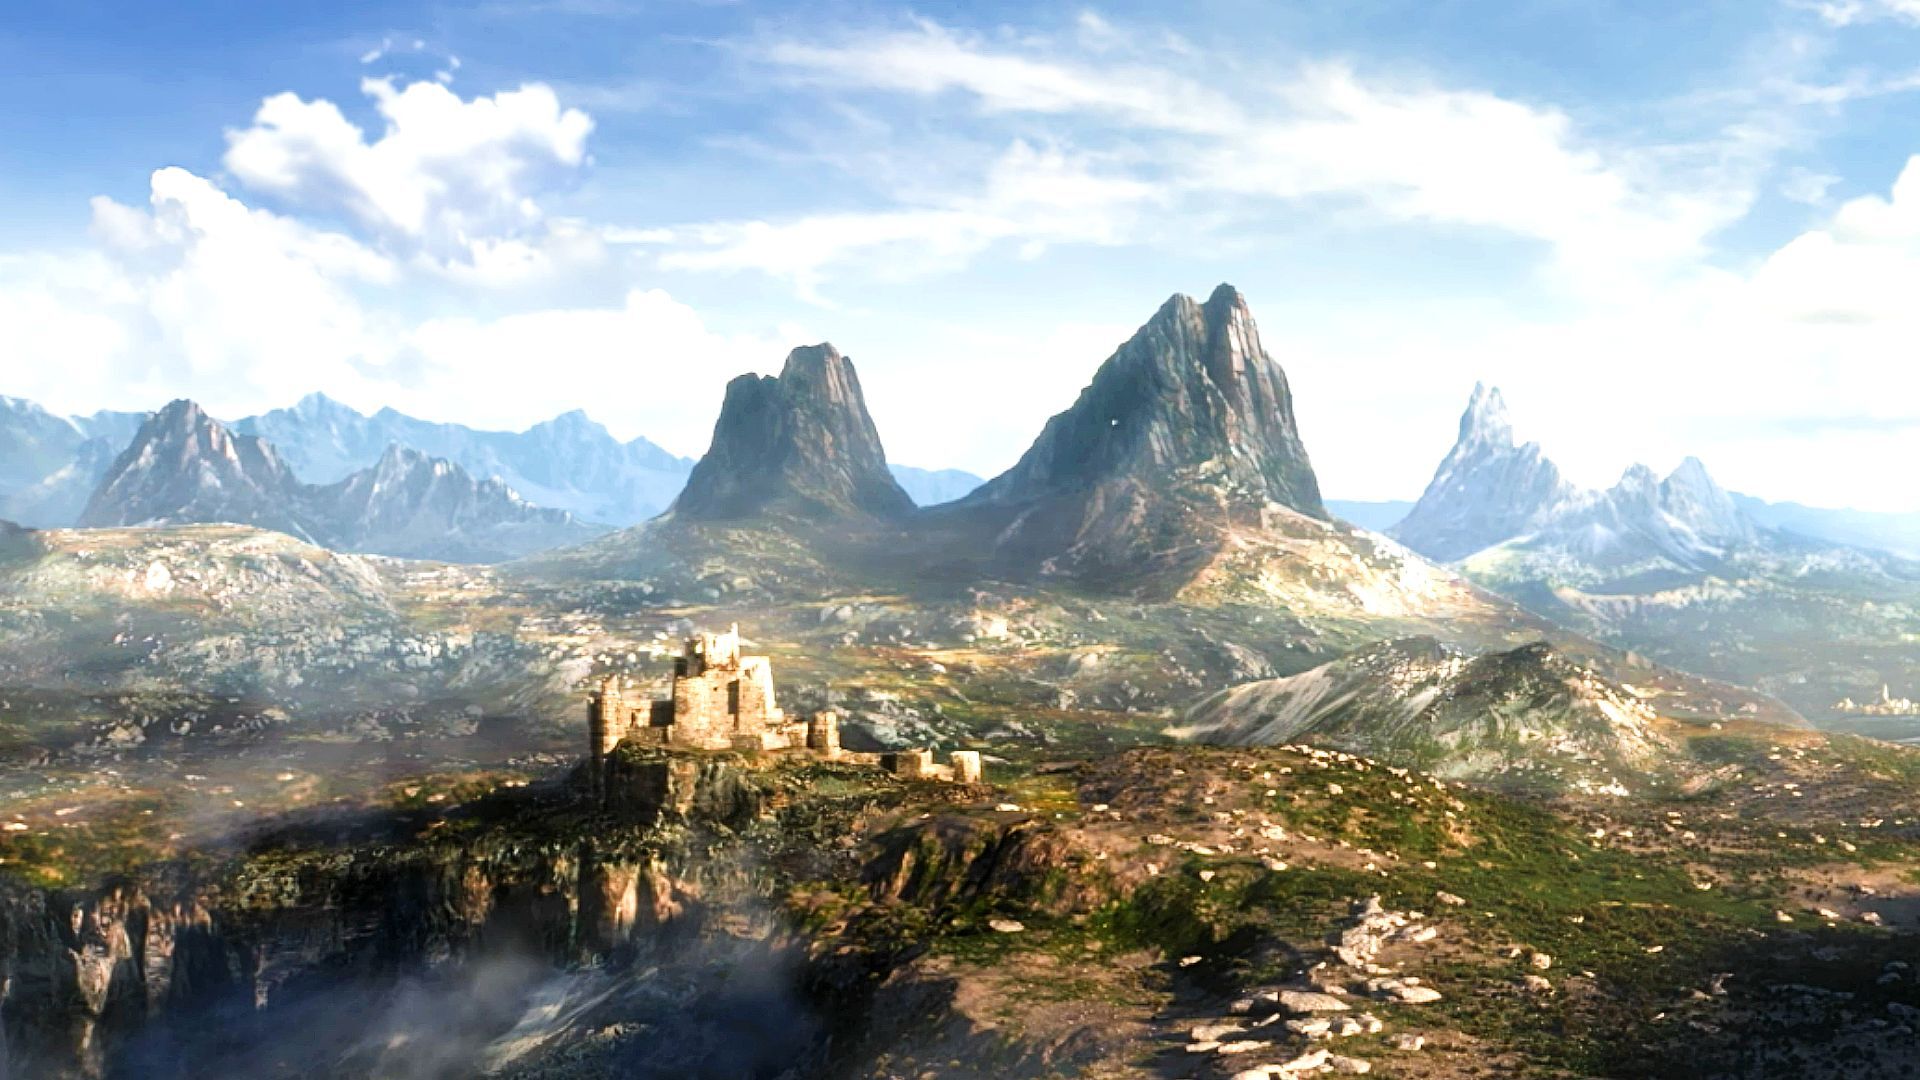 The Elder Scrolls 6 release date speculation and rumours